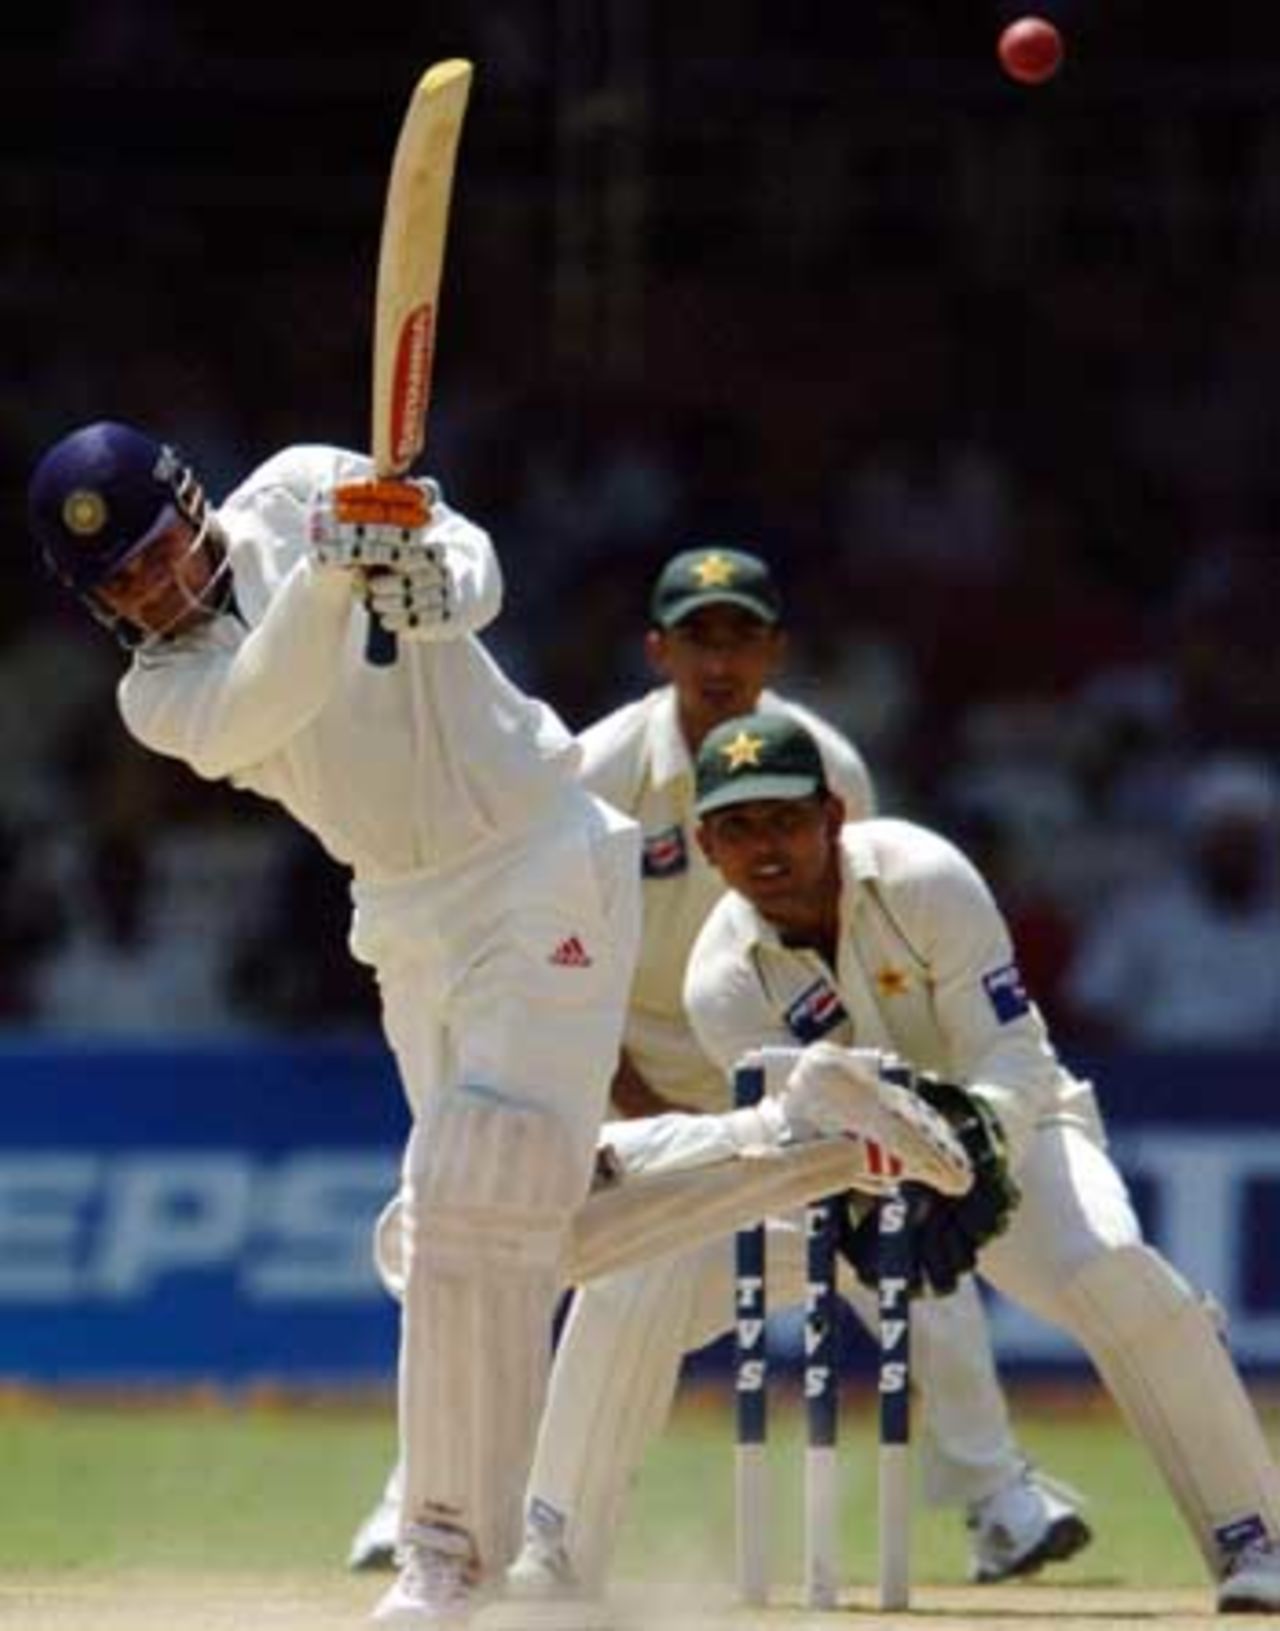 Virender Sehwag was undeterred by wickets falling, India v Pakistan, 3rd Test, Bangalore, 3rd day, March 24, 2005